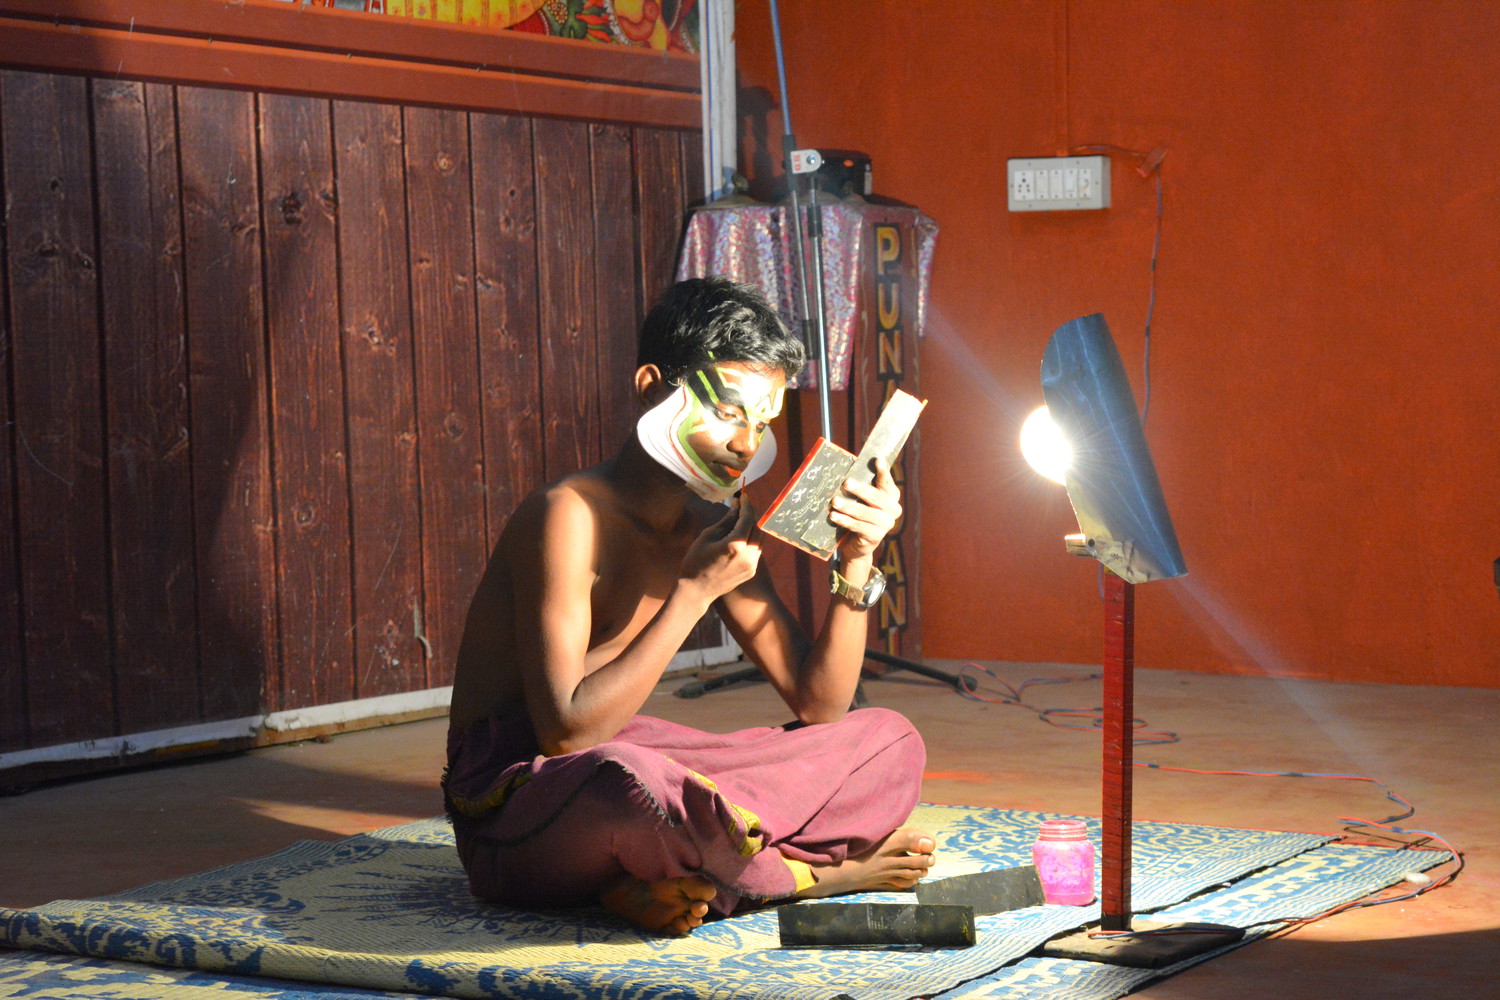 A young boy who is a Kathakali artist applying makeup on his vividly painted face with a small mirror and a piece of paper in his hand, seated on the floor with an electric lamp in front of him